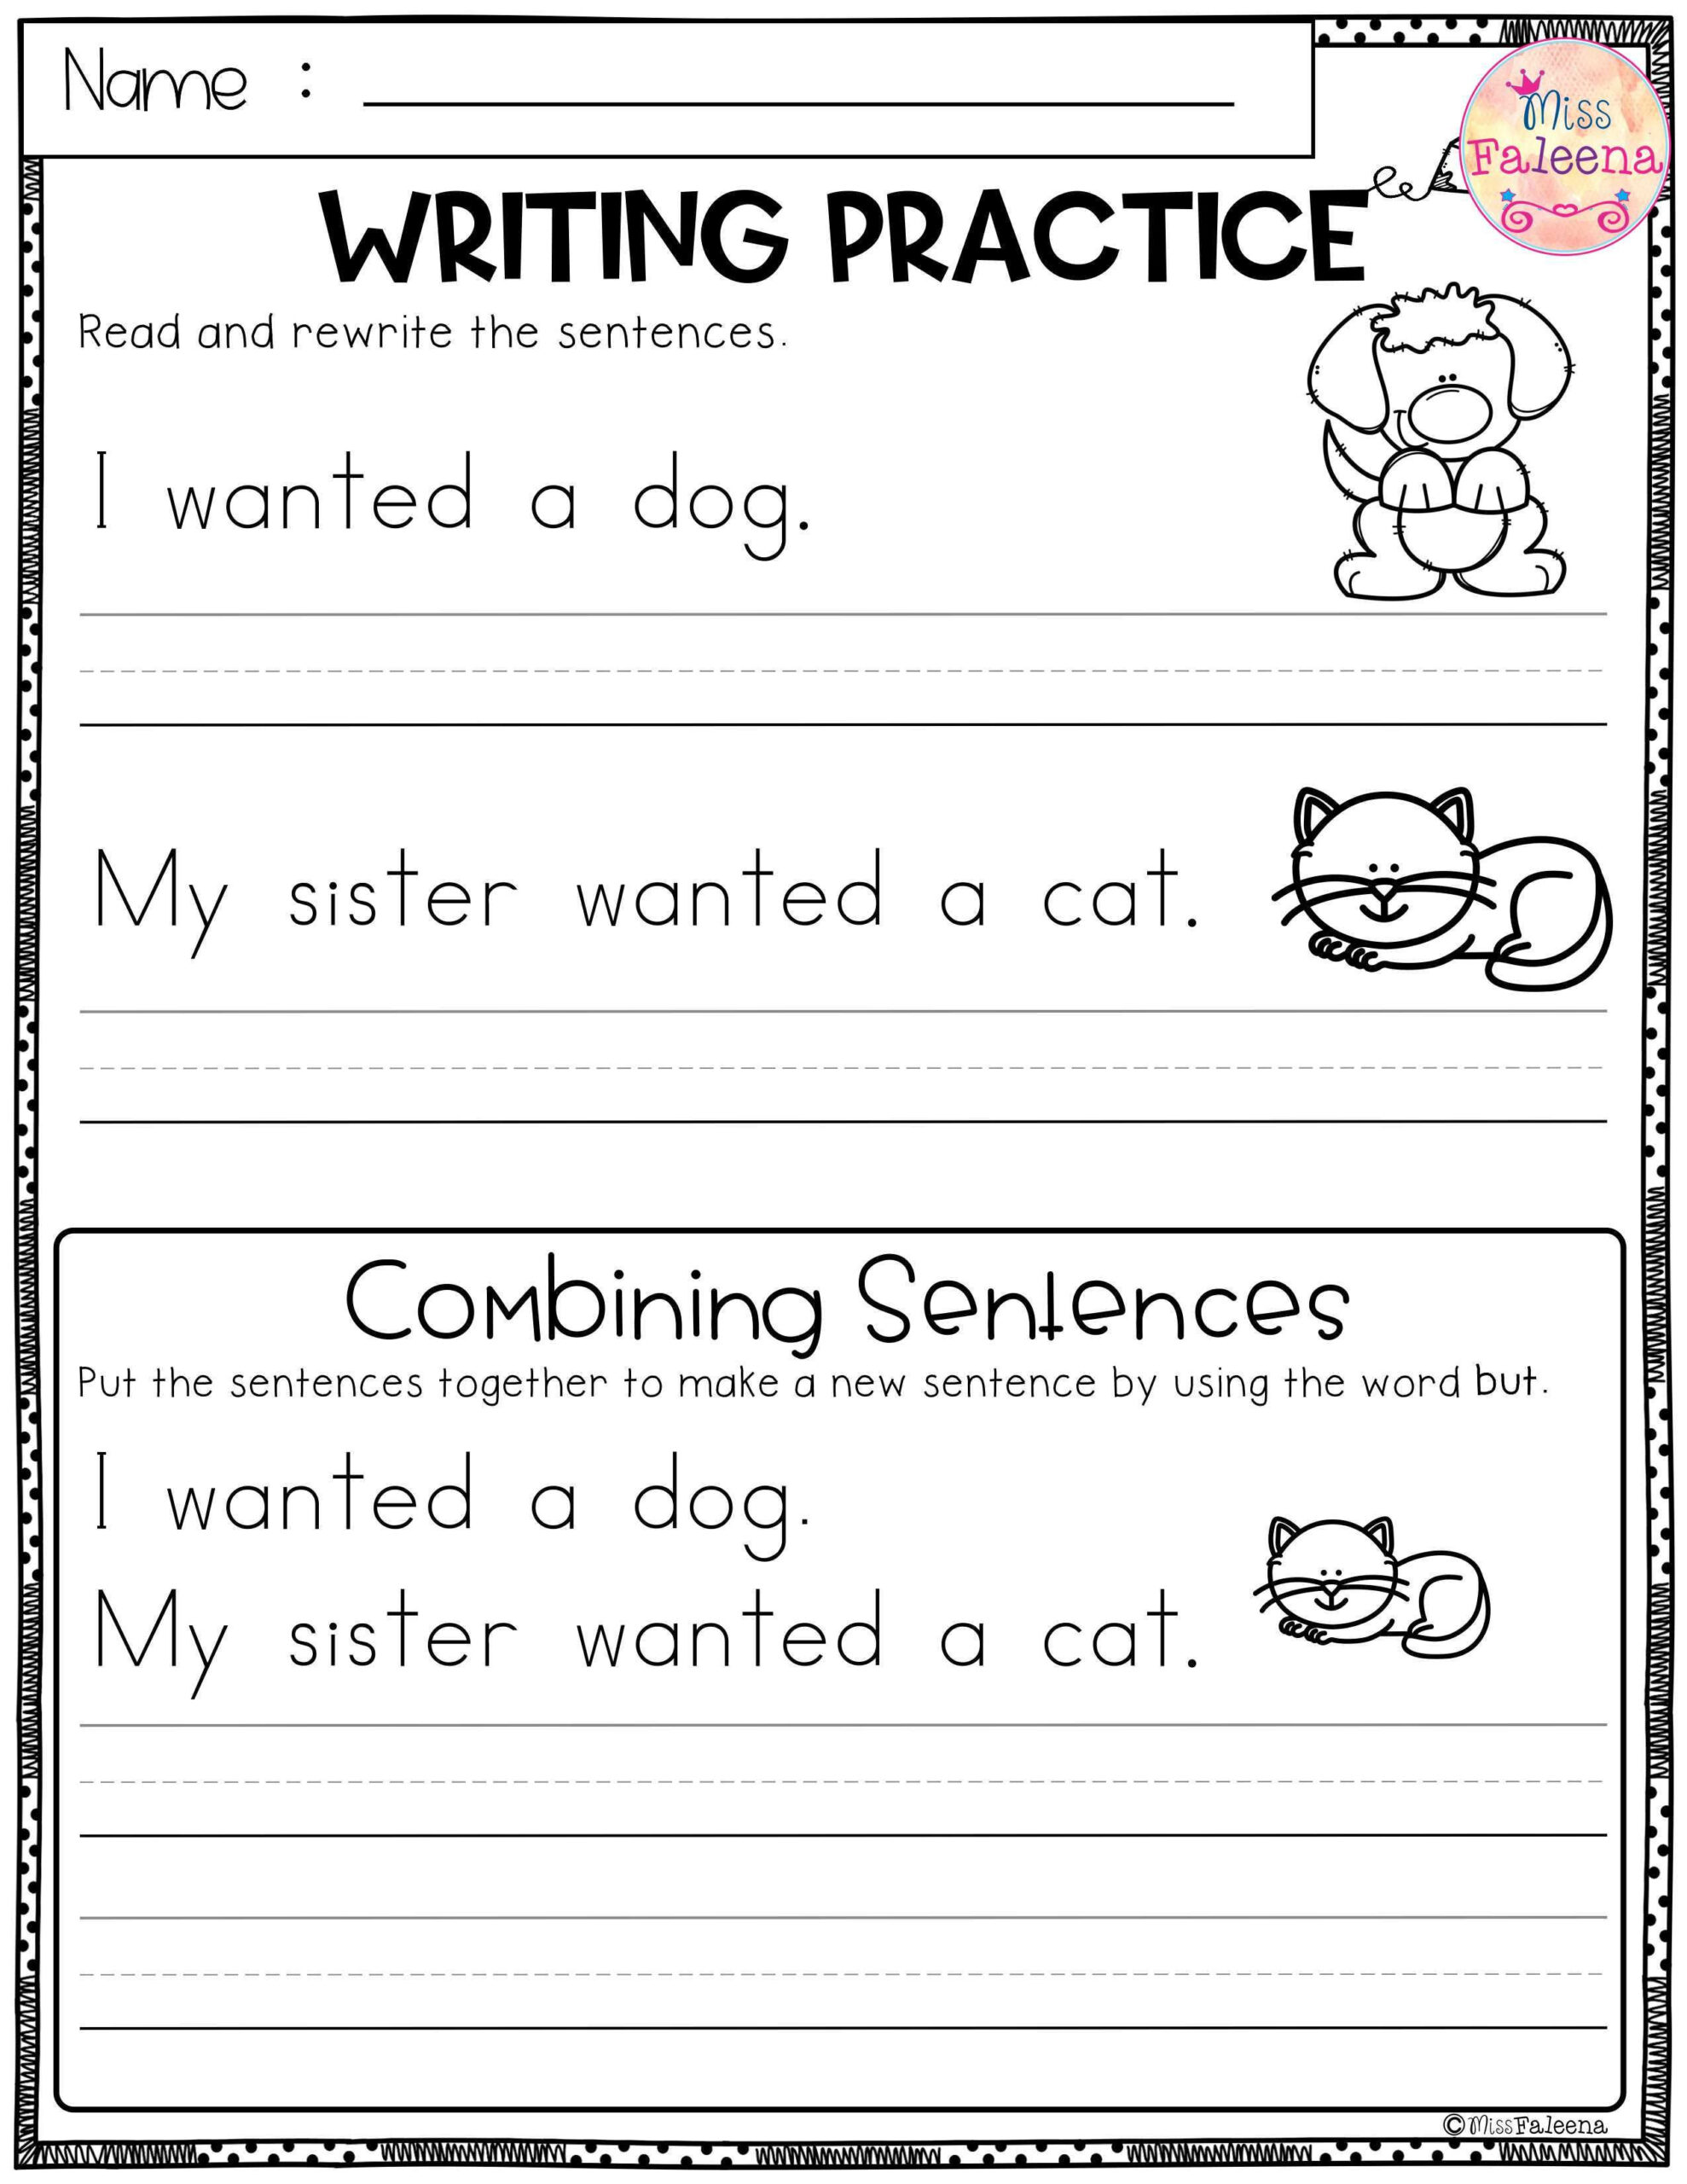 Free Writing Practice Combining Sentences This Product Has 3 Pages 